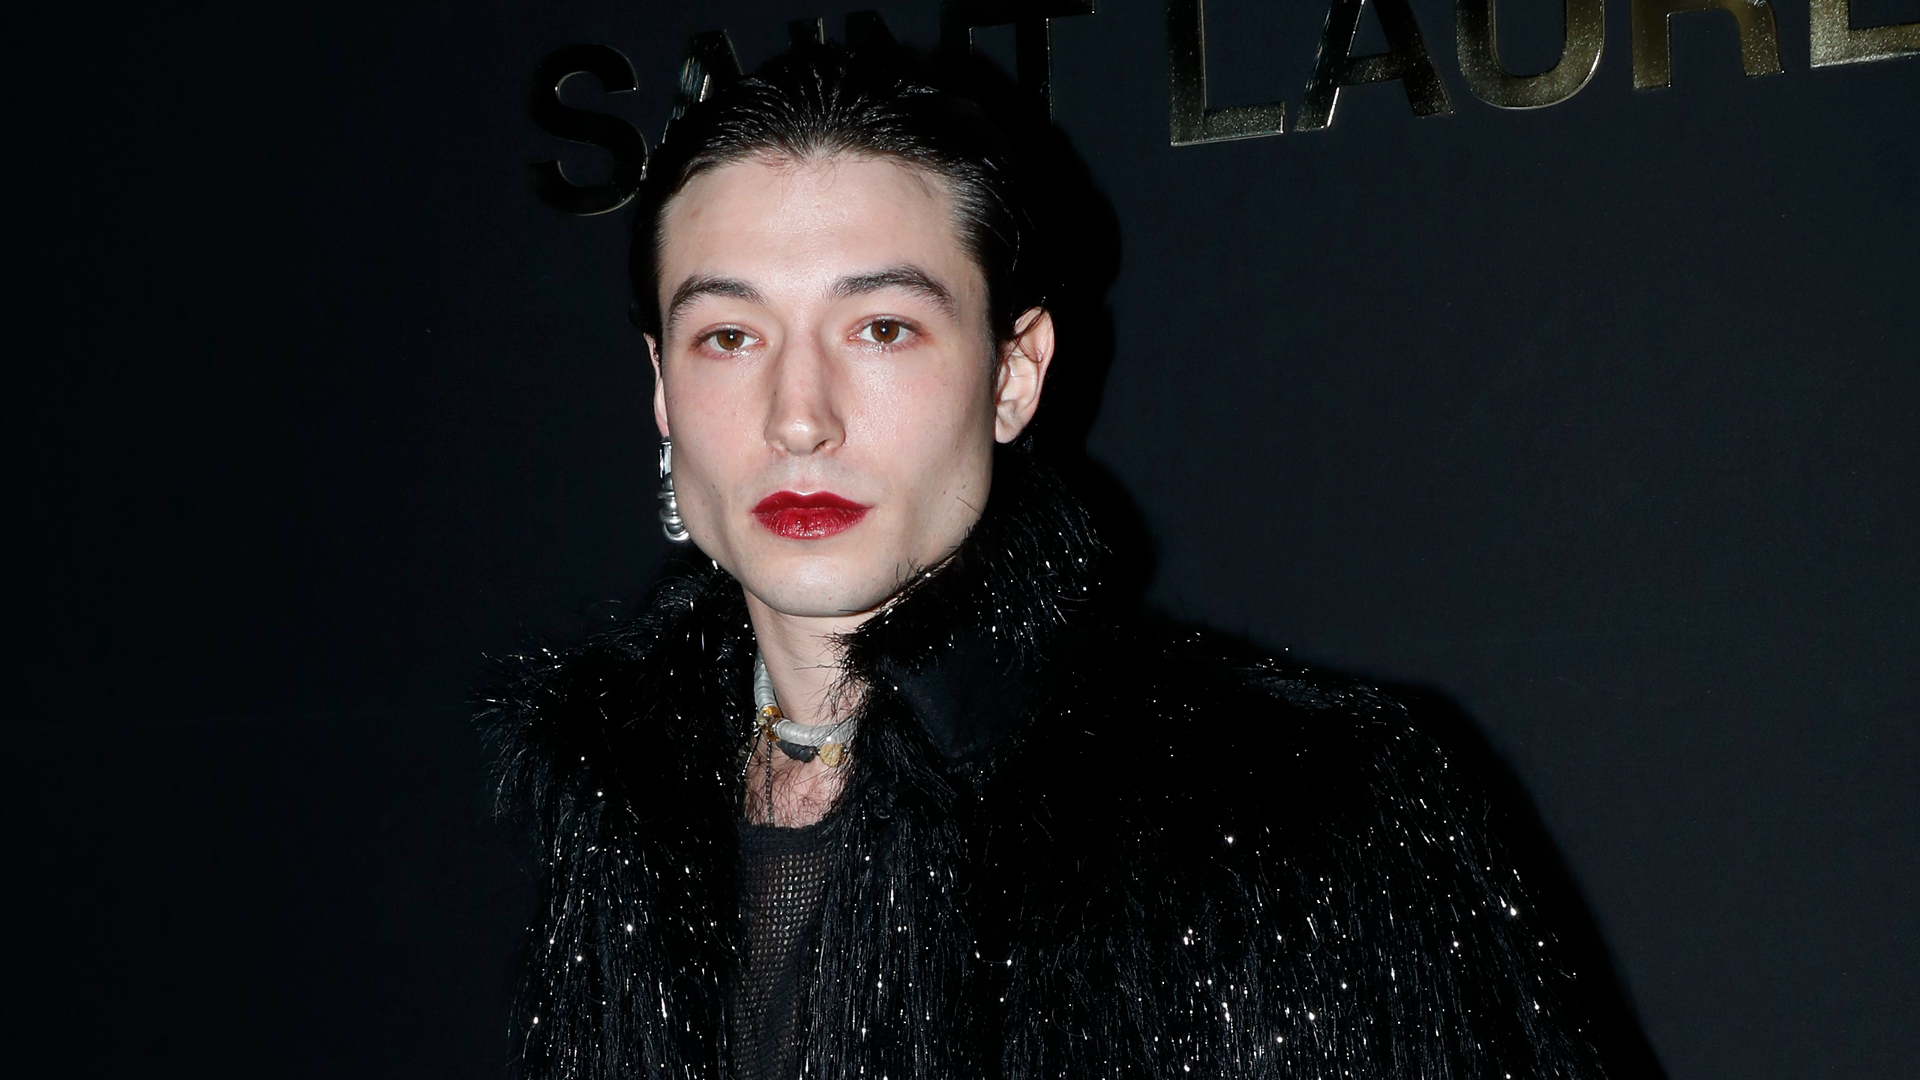 Ezra Miller is pictured at a fashion event